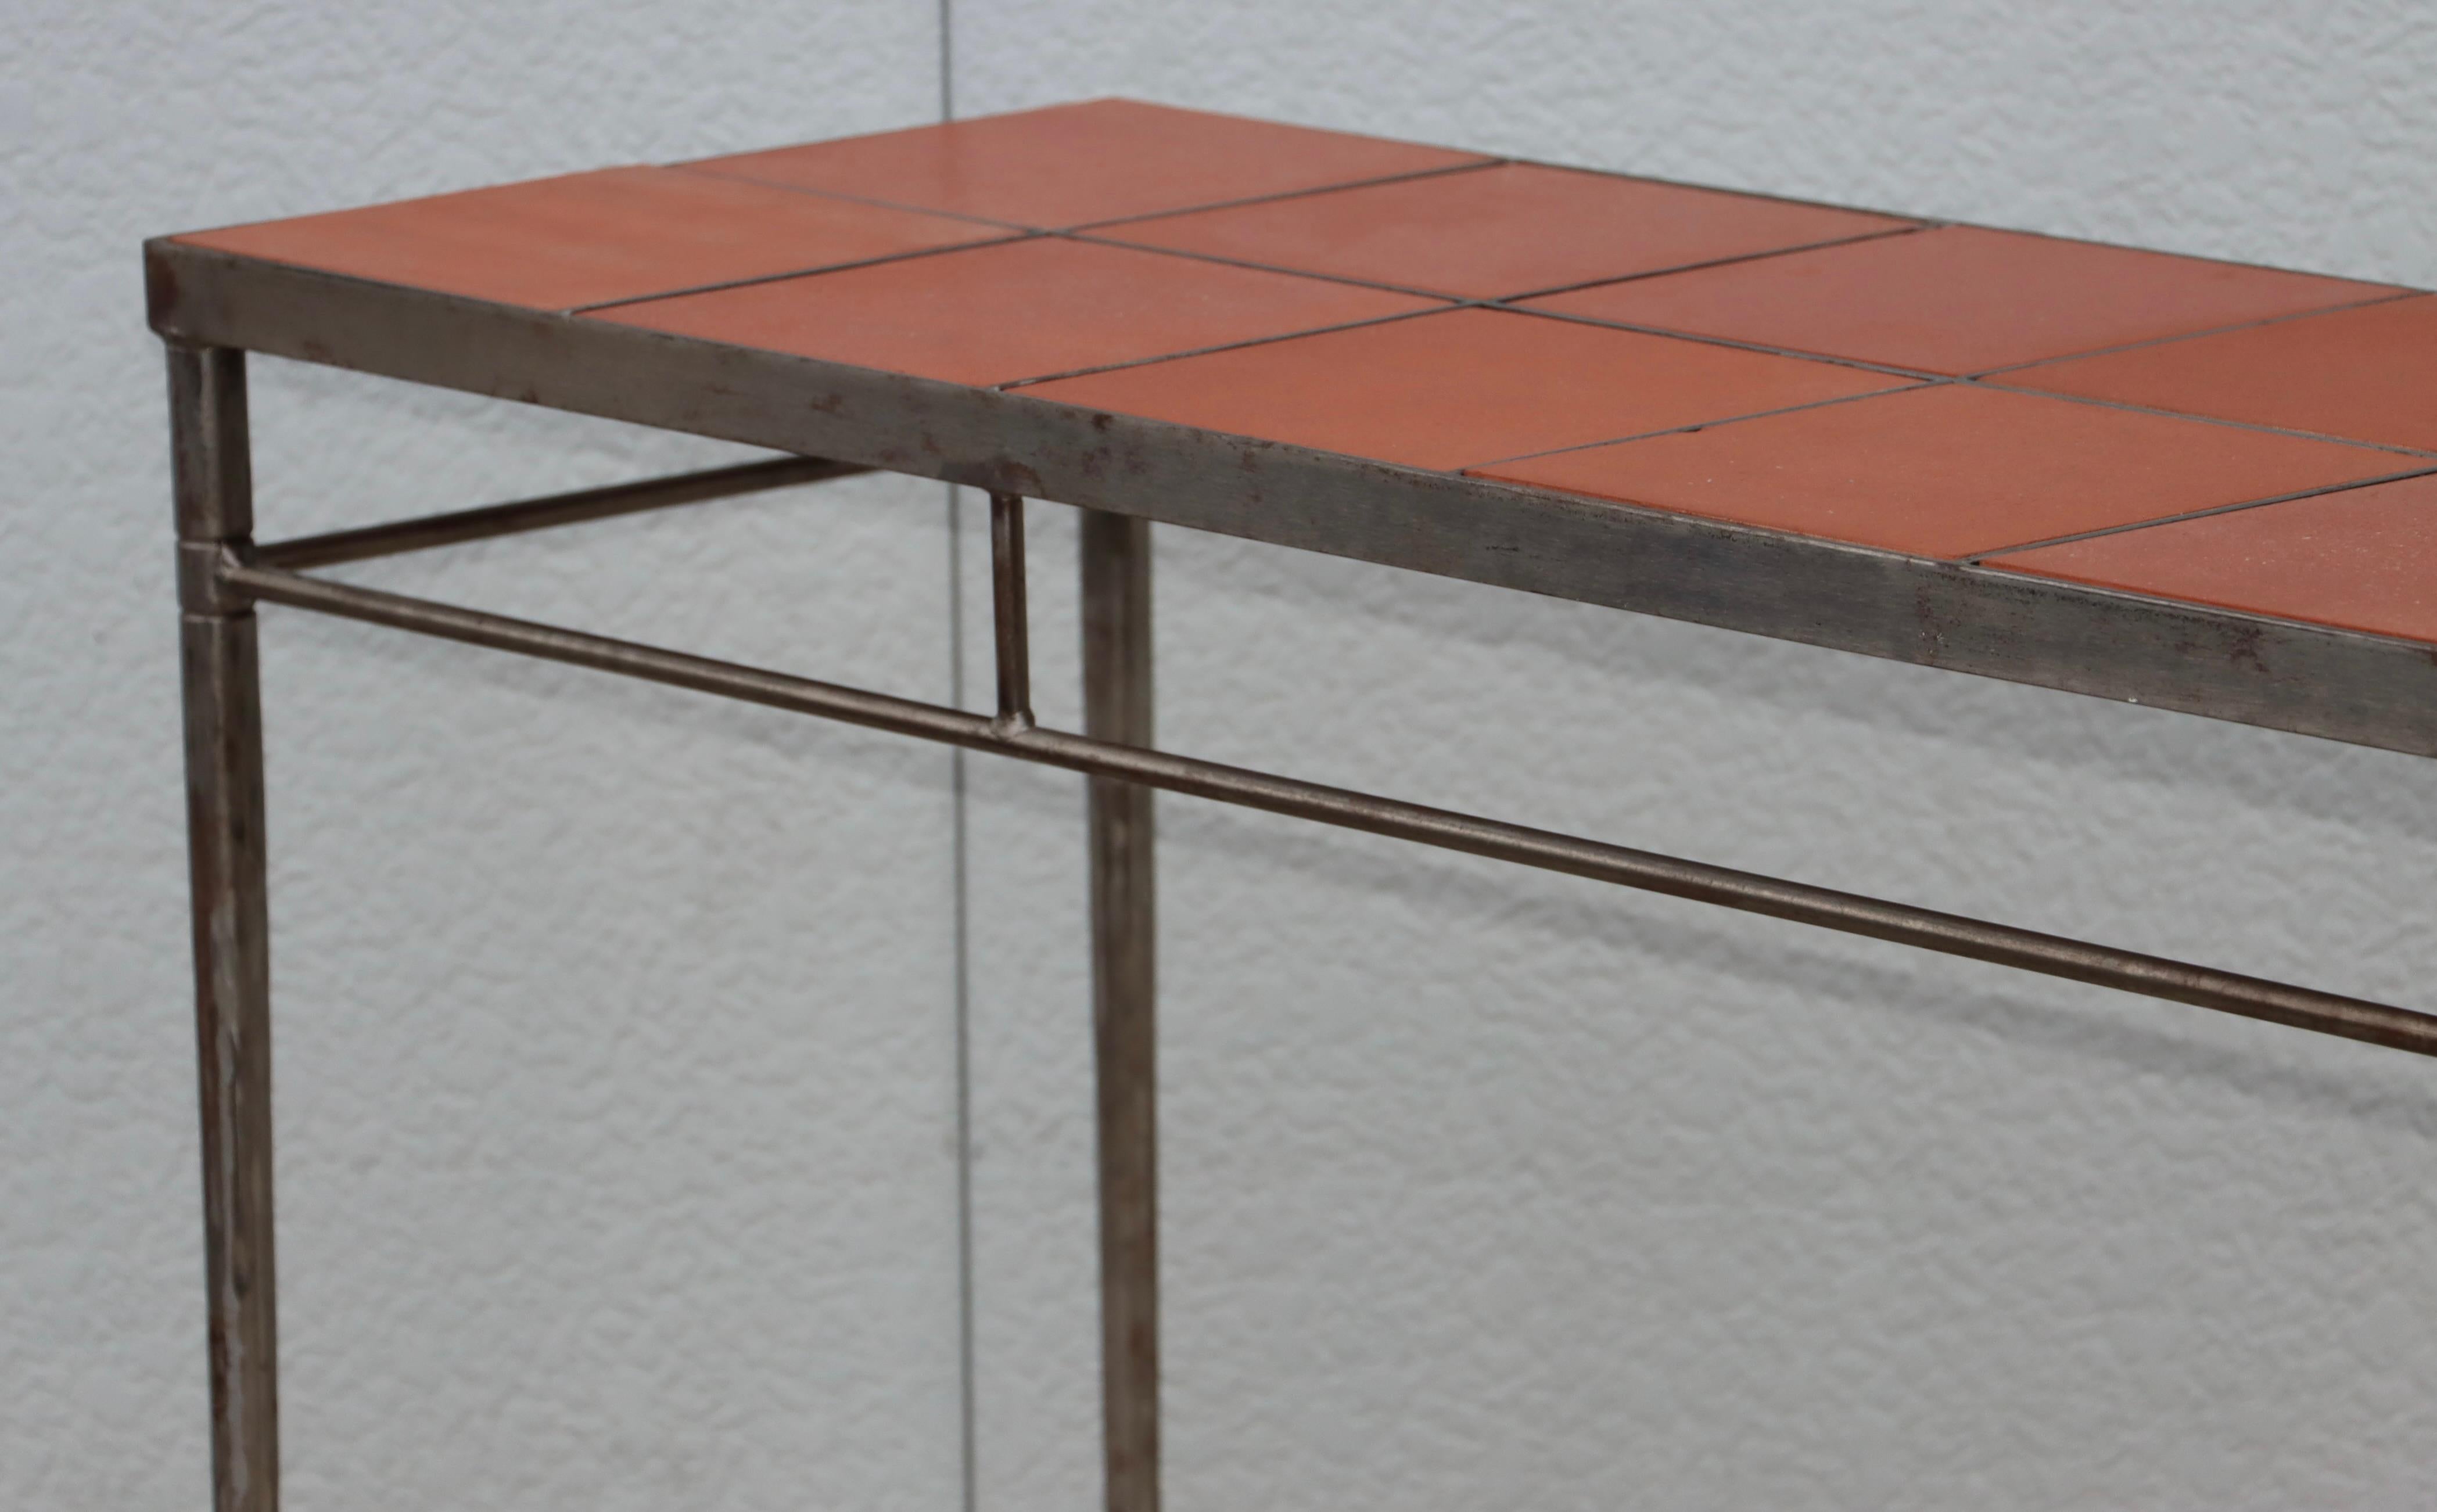 1970's Italian Iron Console Table with Impruneta Terracotta Tile Inserts In Good Condition For Sale In New York, NY